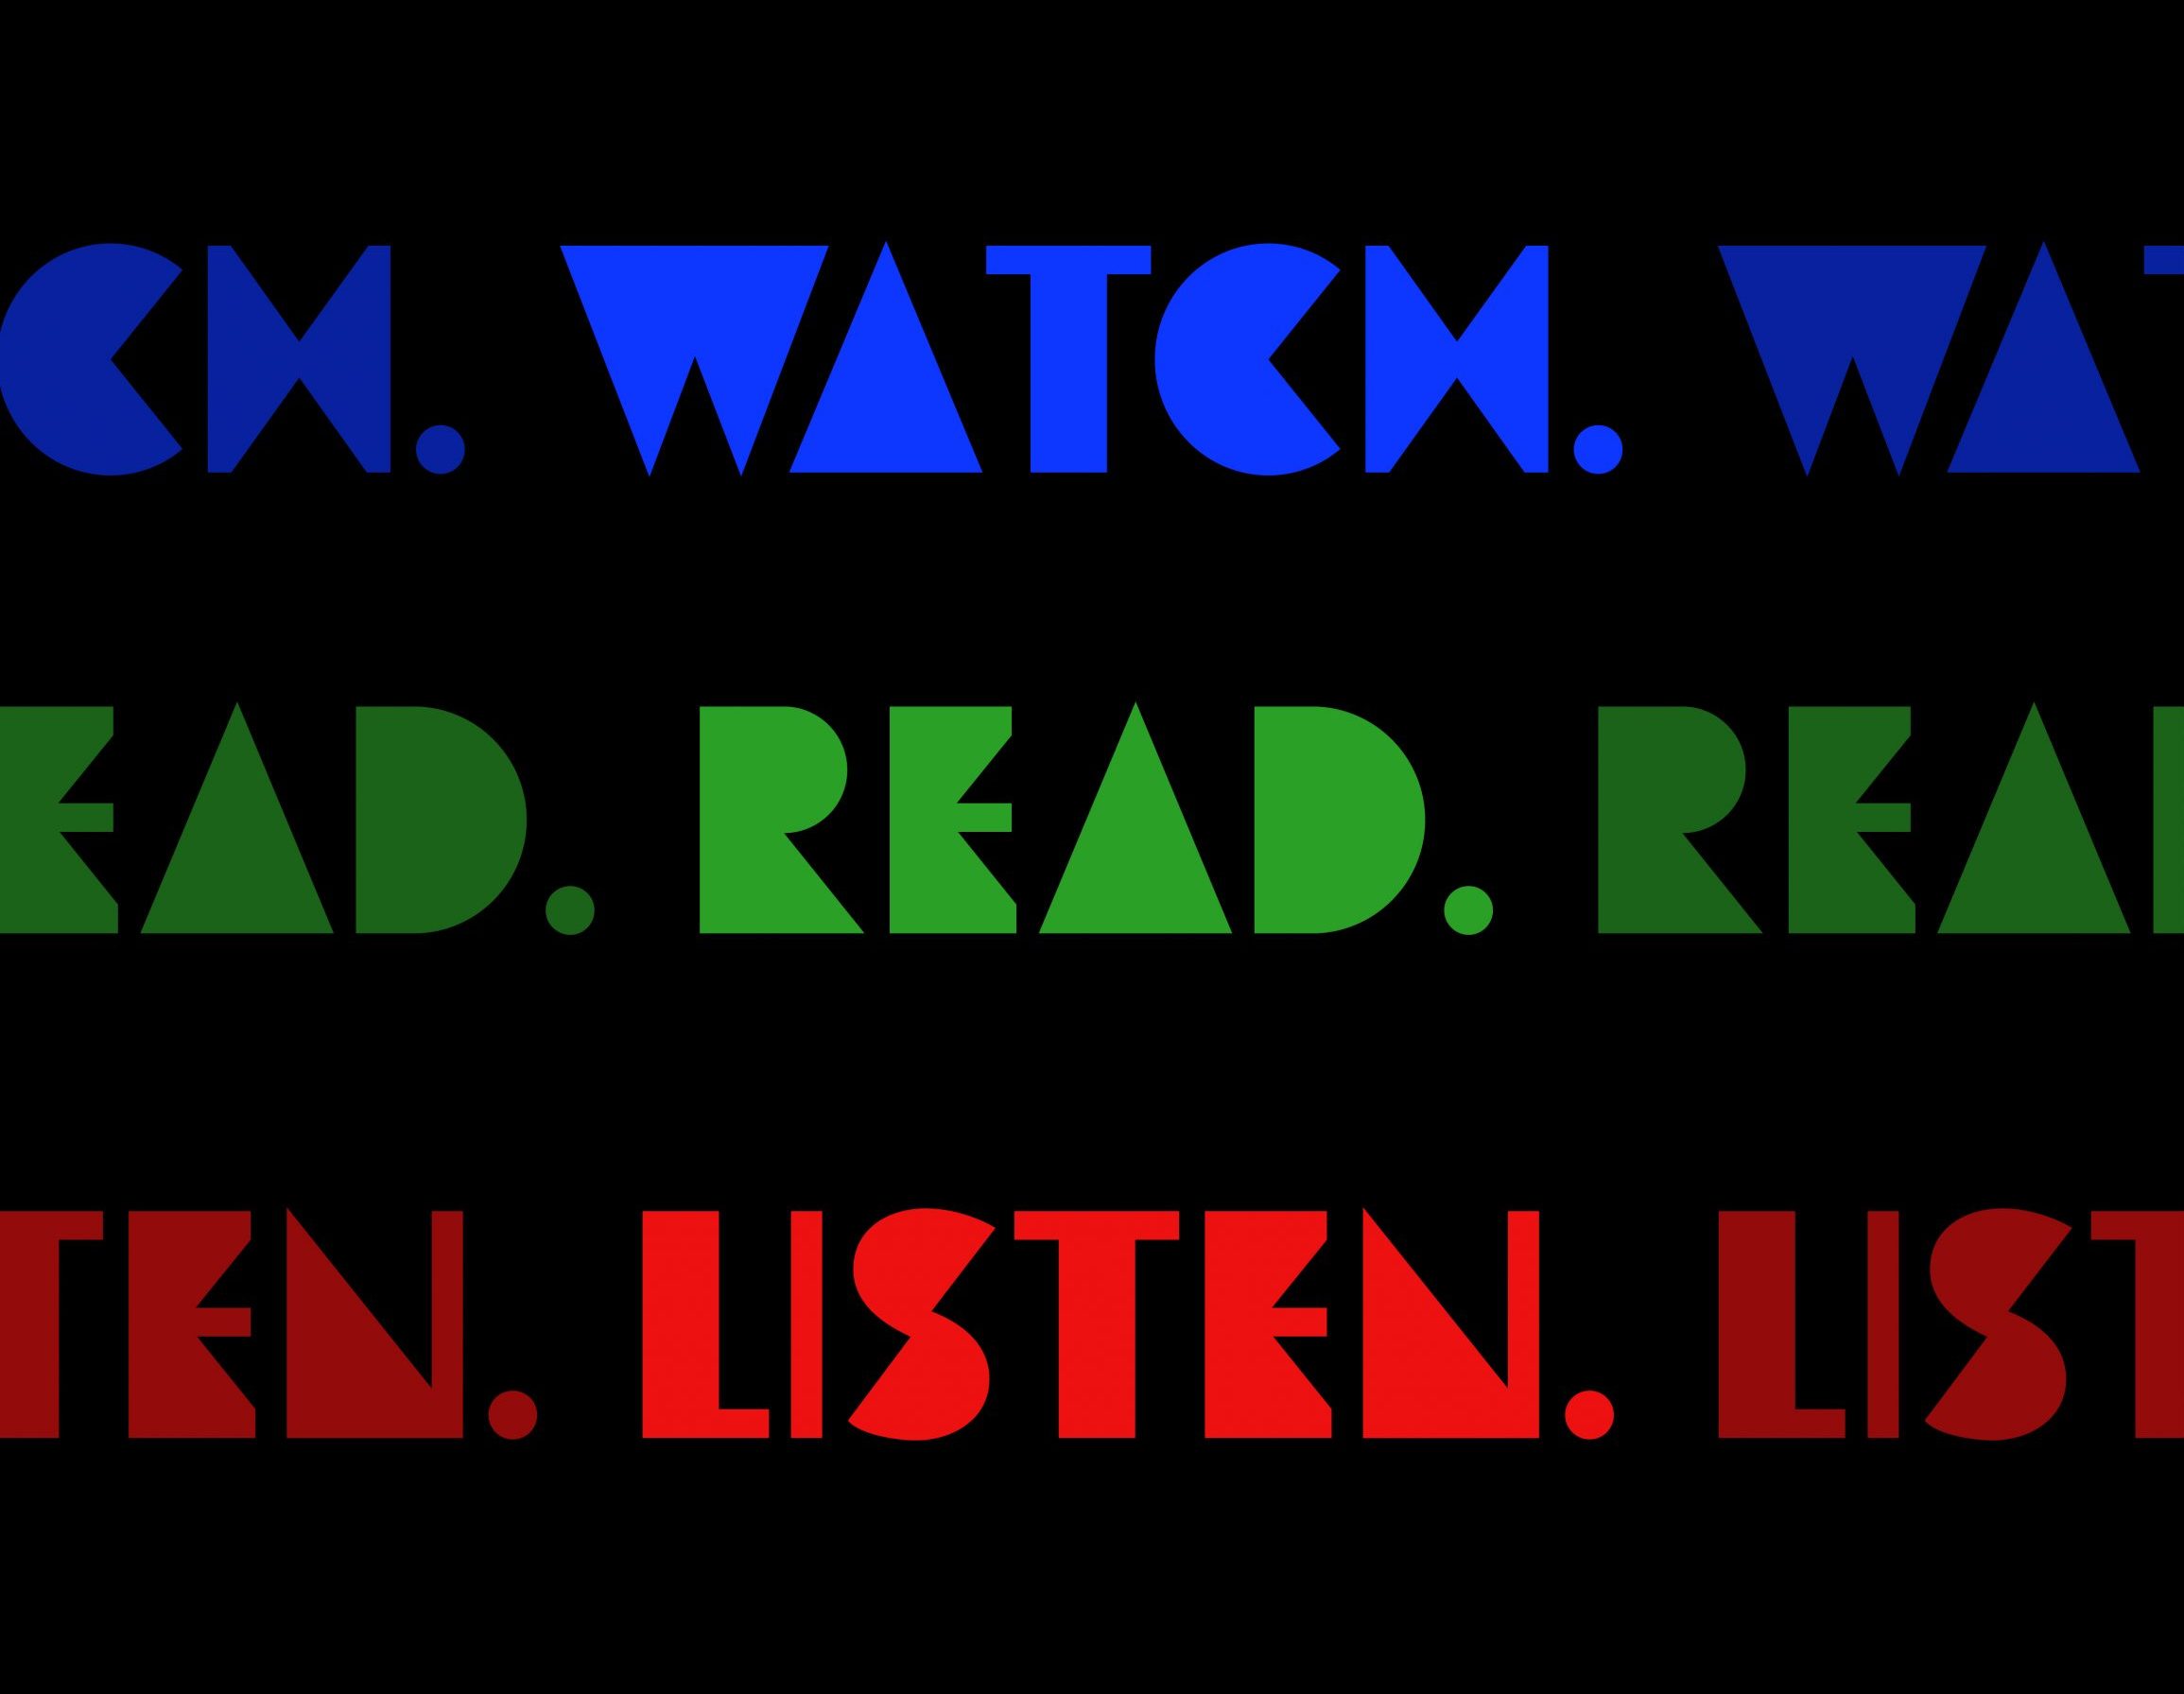 An Incomplete Guide on what to read, watch, listen to learn about environmentalism